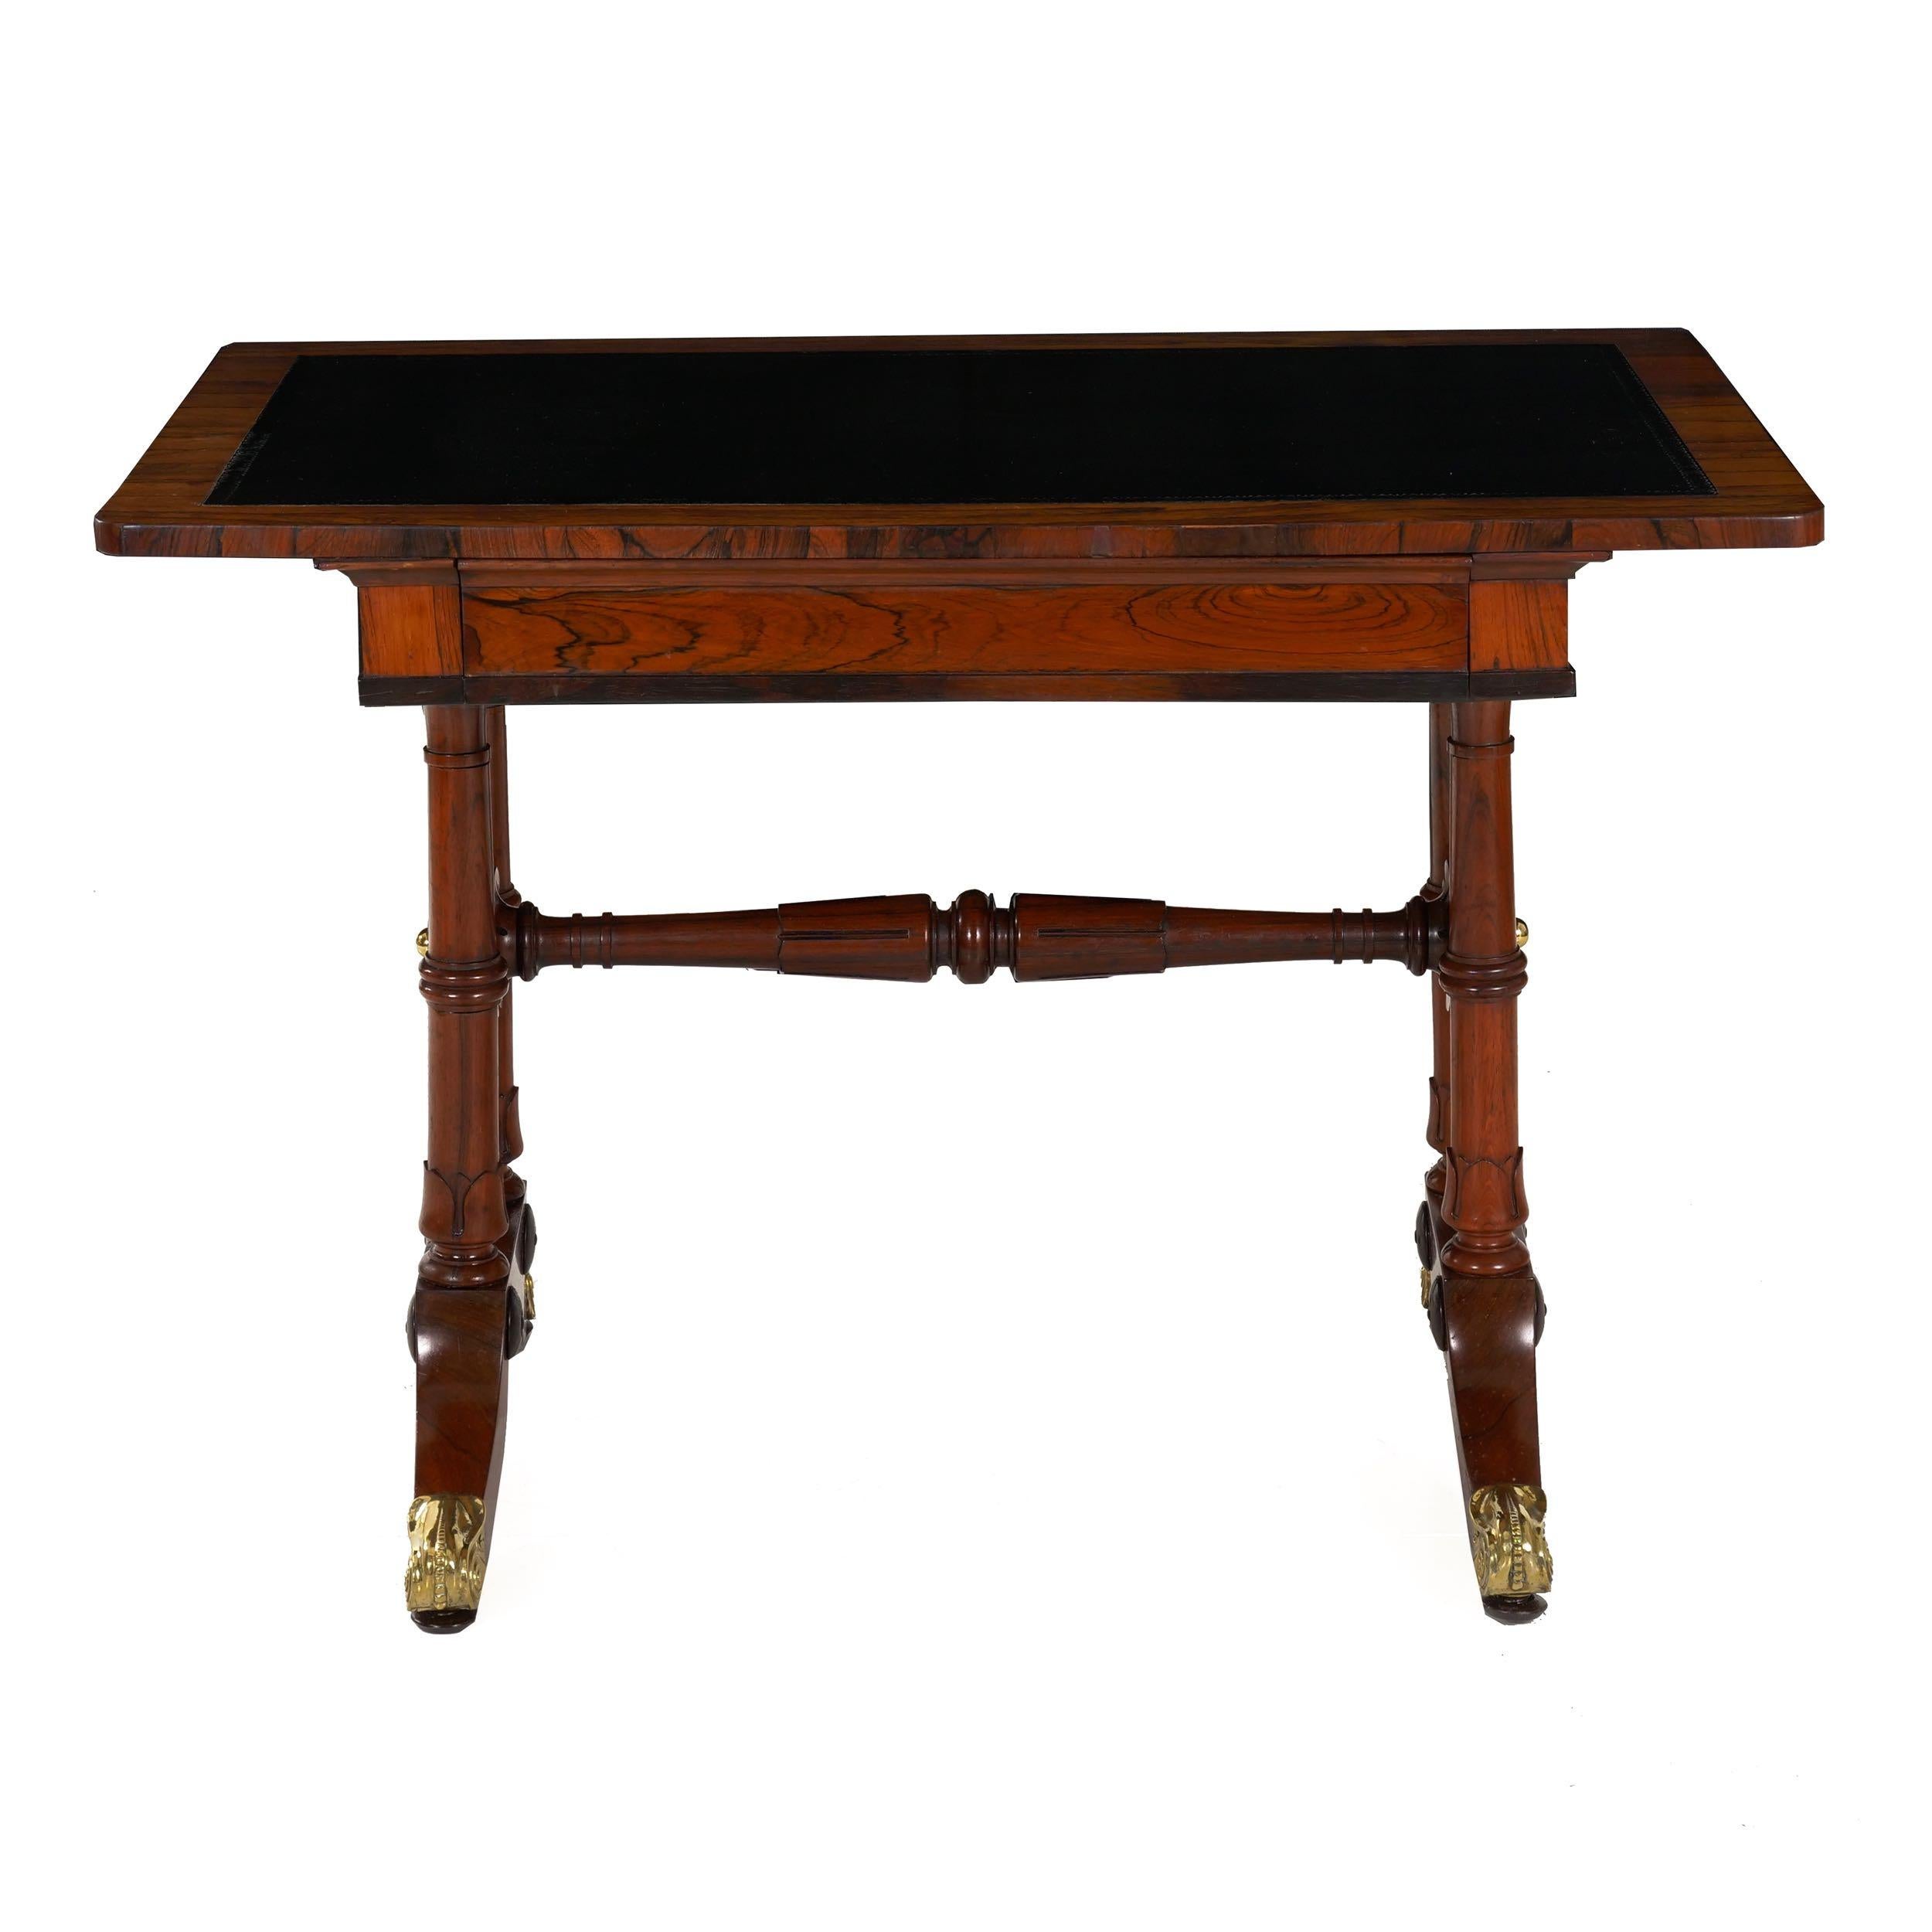 WILLIAM IV rosewood leather-top writing table
of small proportions with single drawer; England, circa 1835
Item # 007NZP30K 

This unusual writing table of the William IV period is of noteworthy dimensions, allowing the slight table to serve as